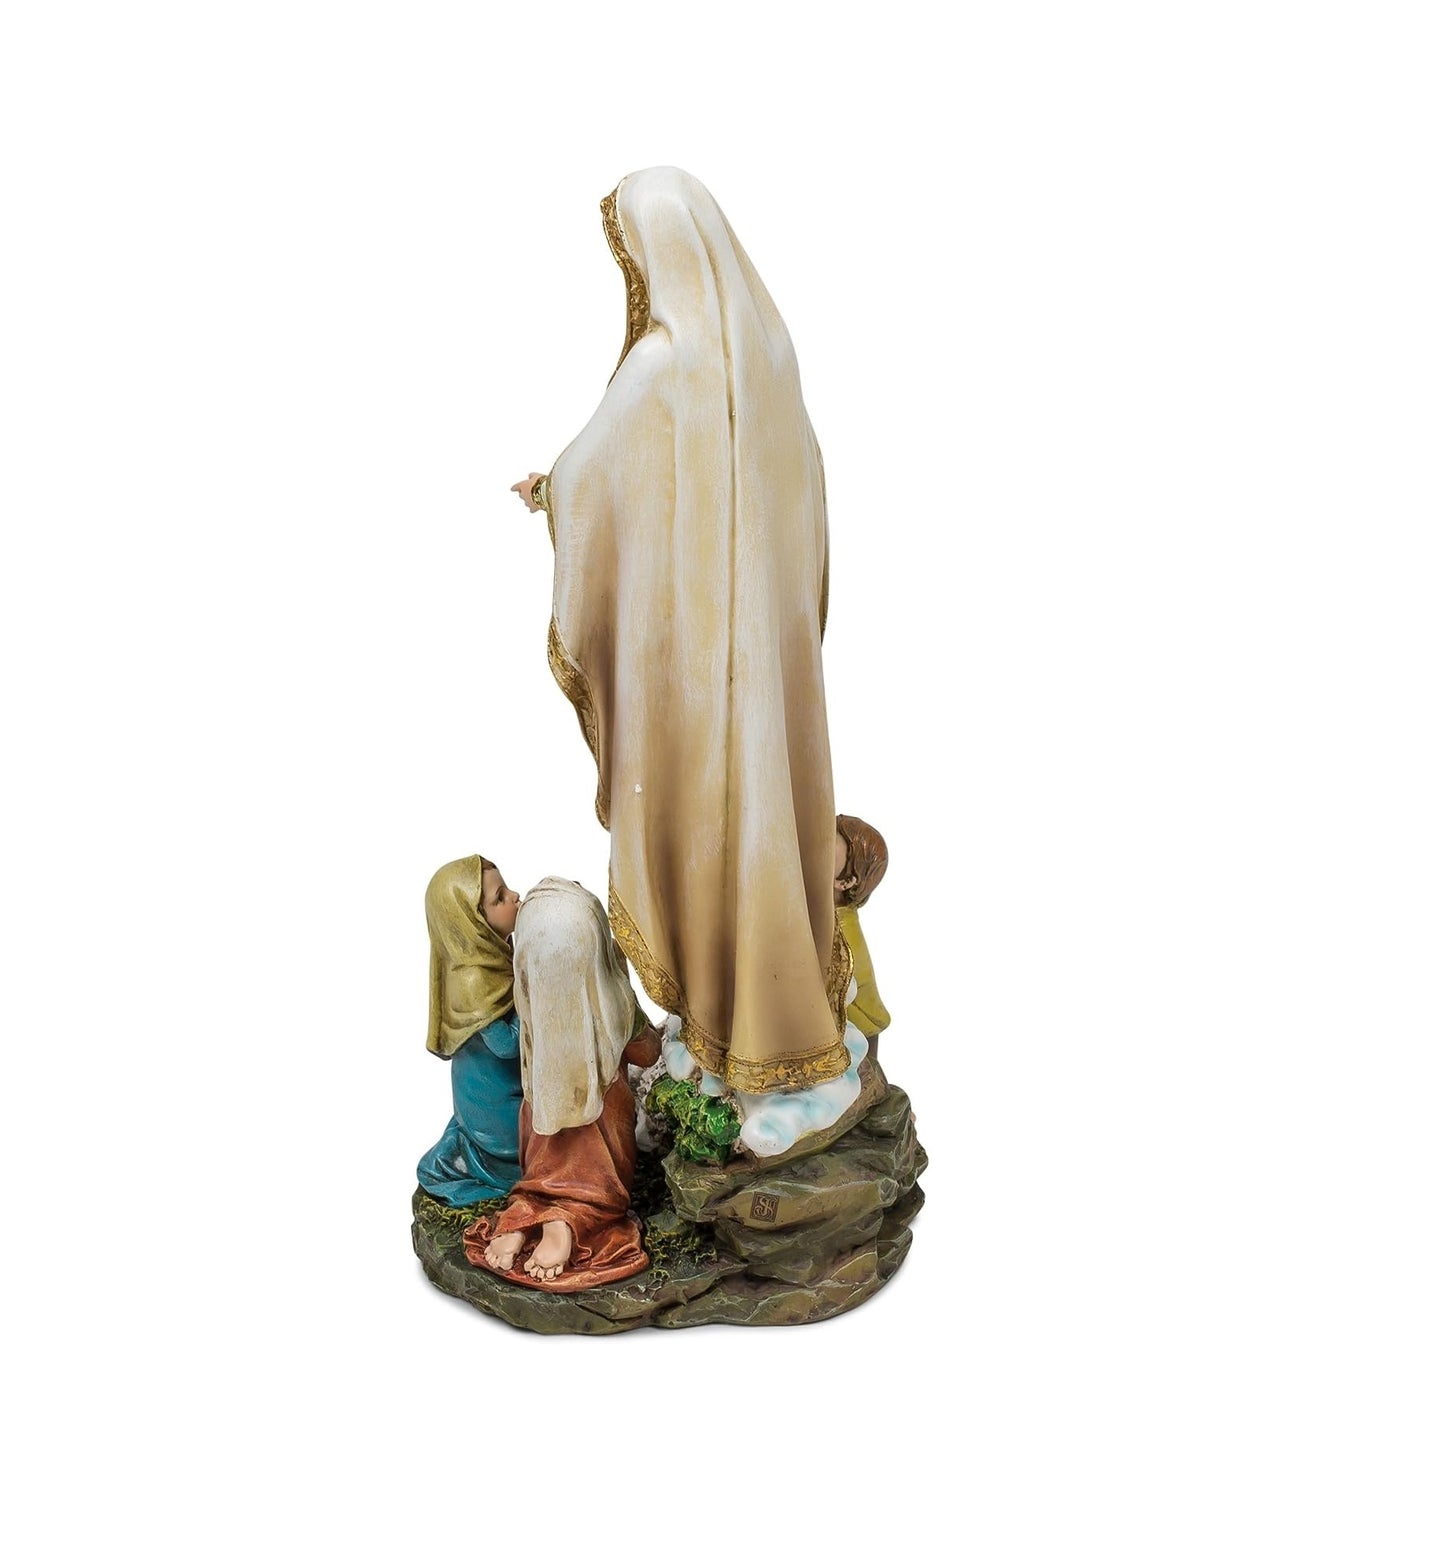 Our Lady of Fatima Figure, Renaissance Collection by Roman